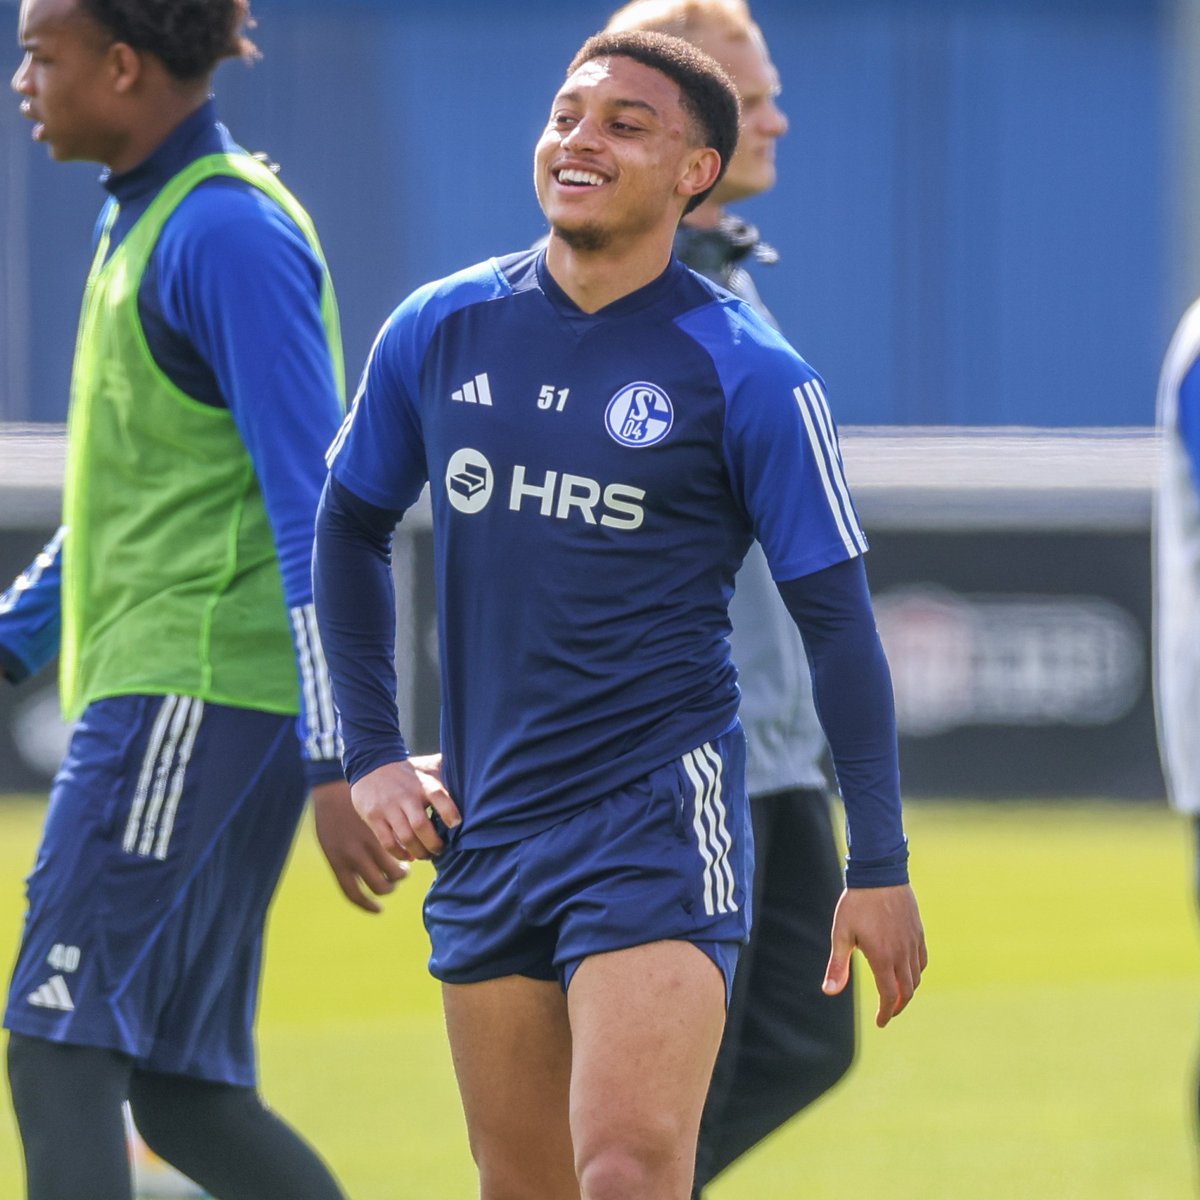 Steven's got a spring in his step 😄 #S04